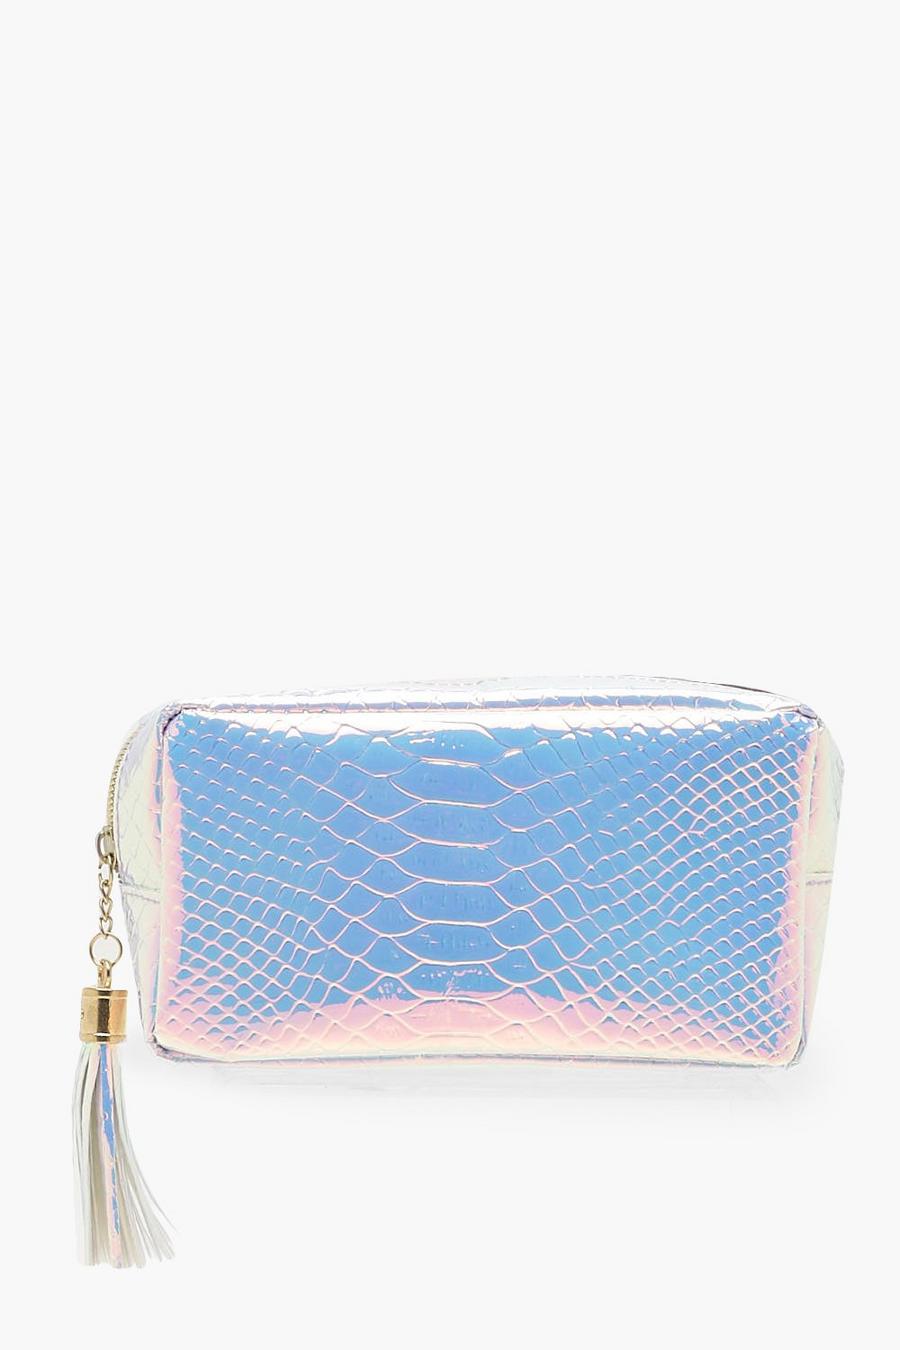 Holographic Mermaid Small Makeup Bag image number 1